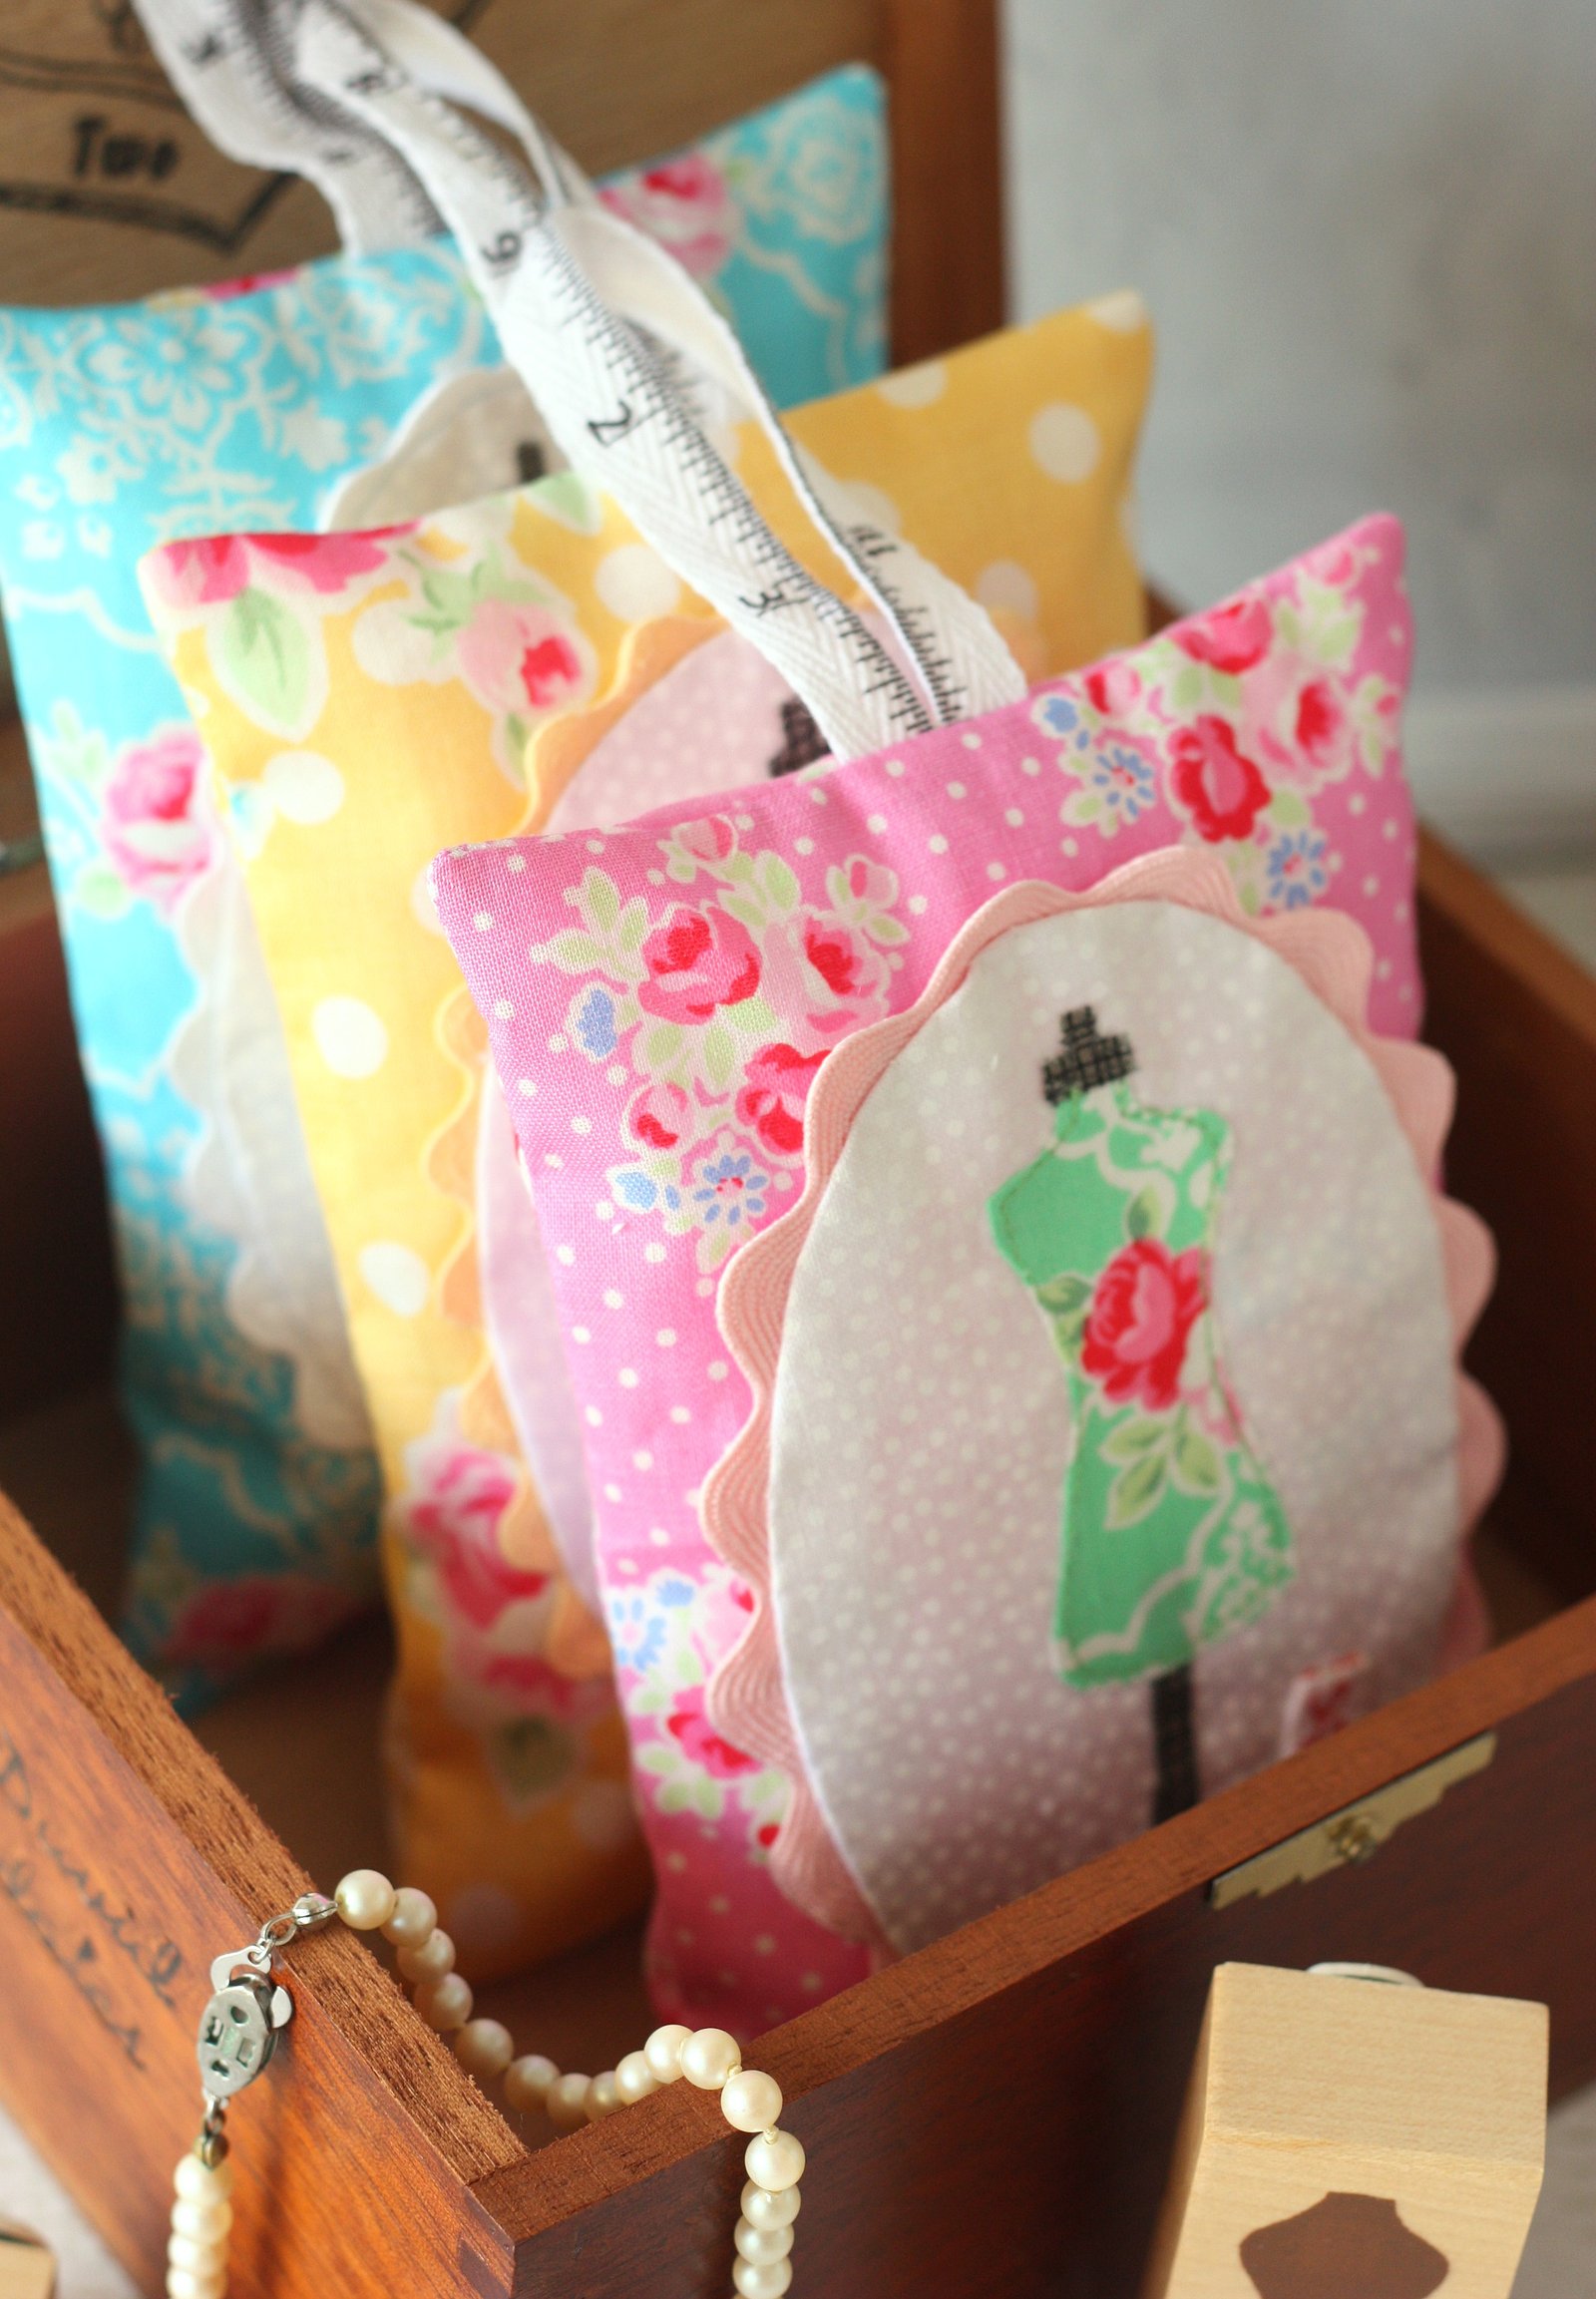 Dress Form Lavender Sachets, from A Spoonful of Sugar by Lisa Cox